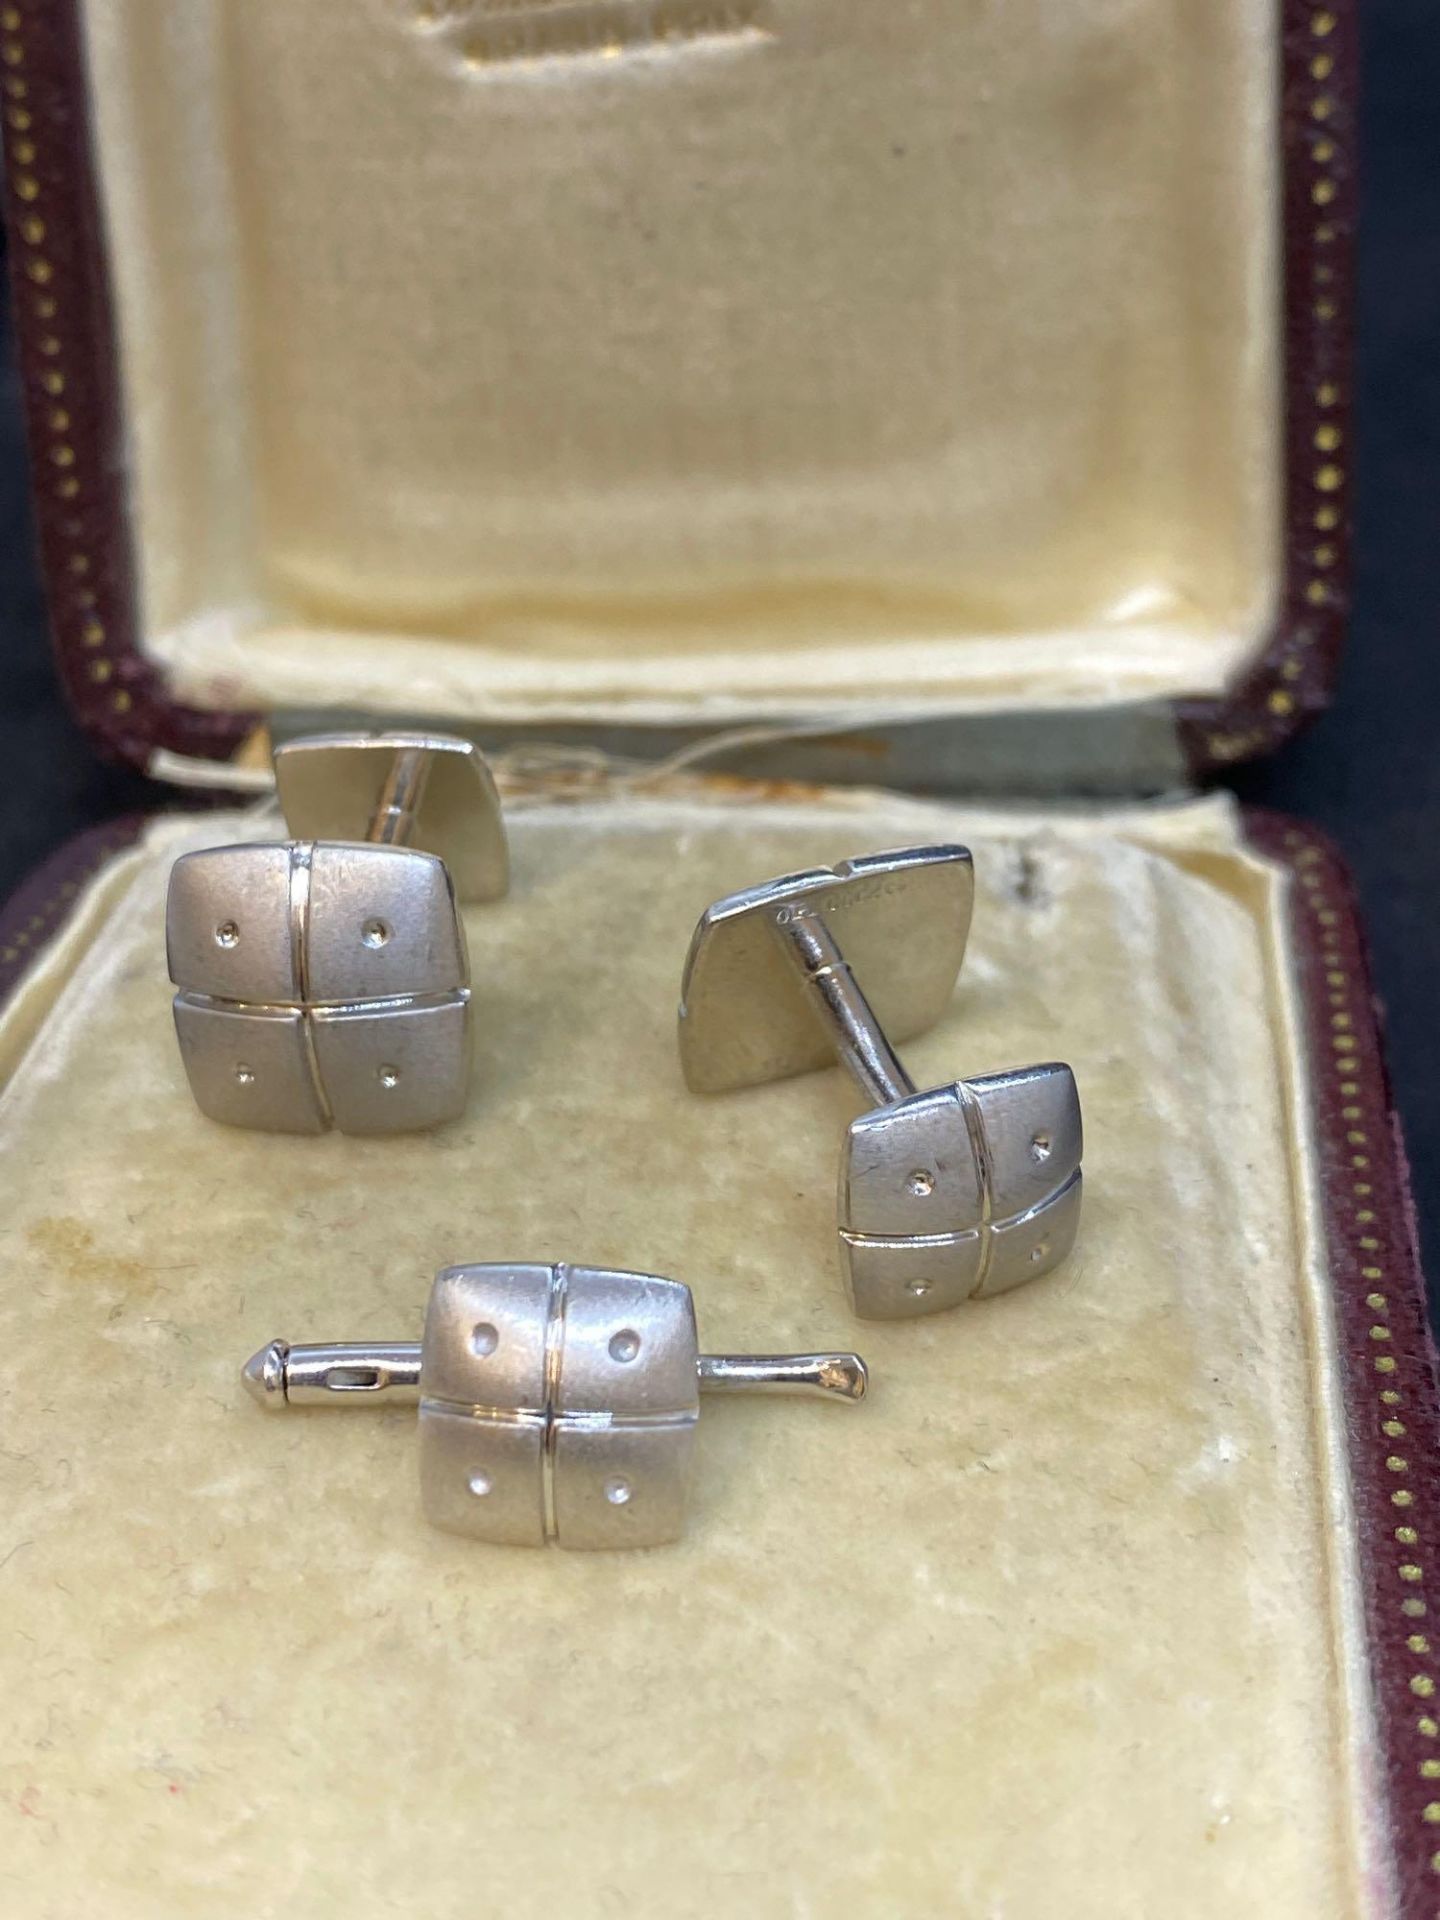 18ct White Gold Tiffany & Co Cuff Links and Matching Tie Pin - 23 Grams - Image 2 of 5